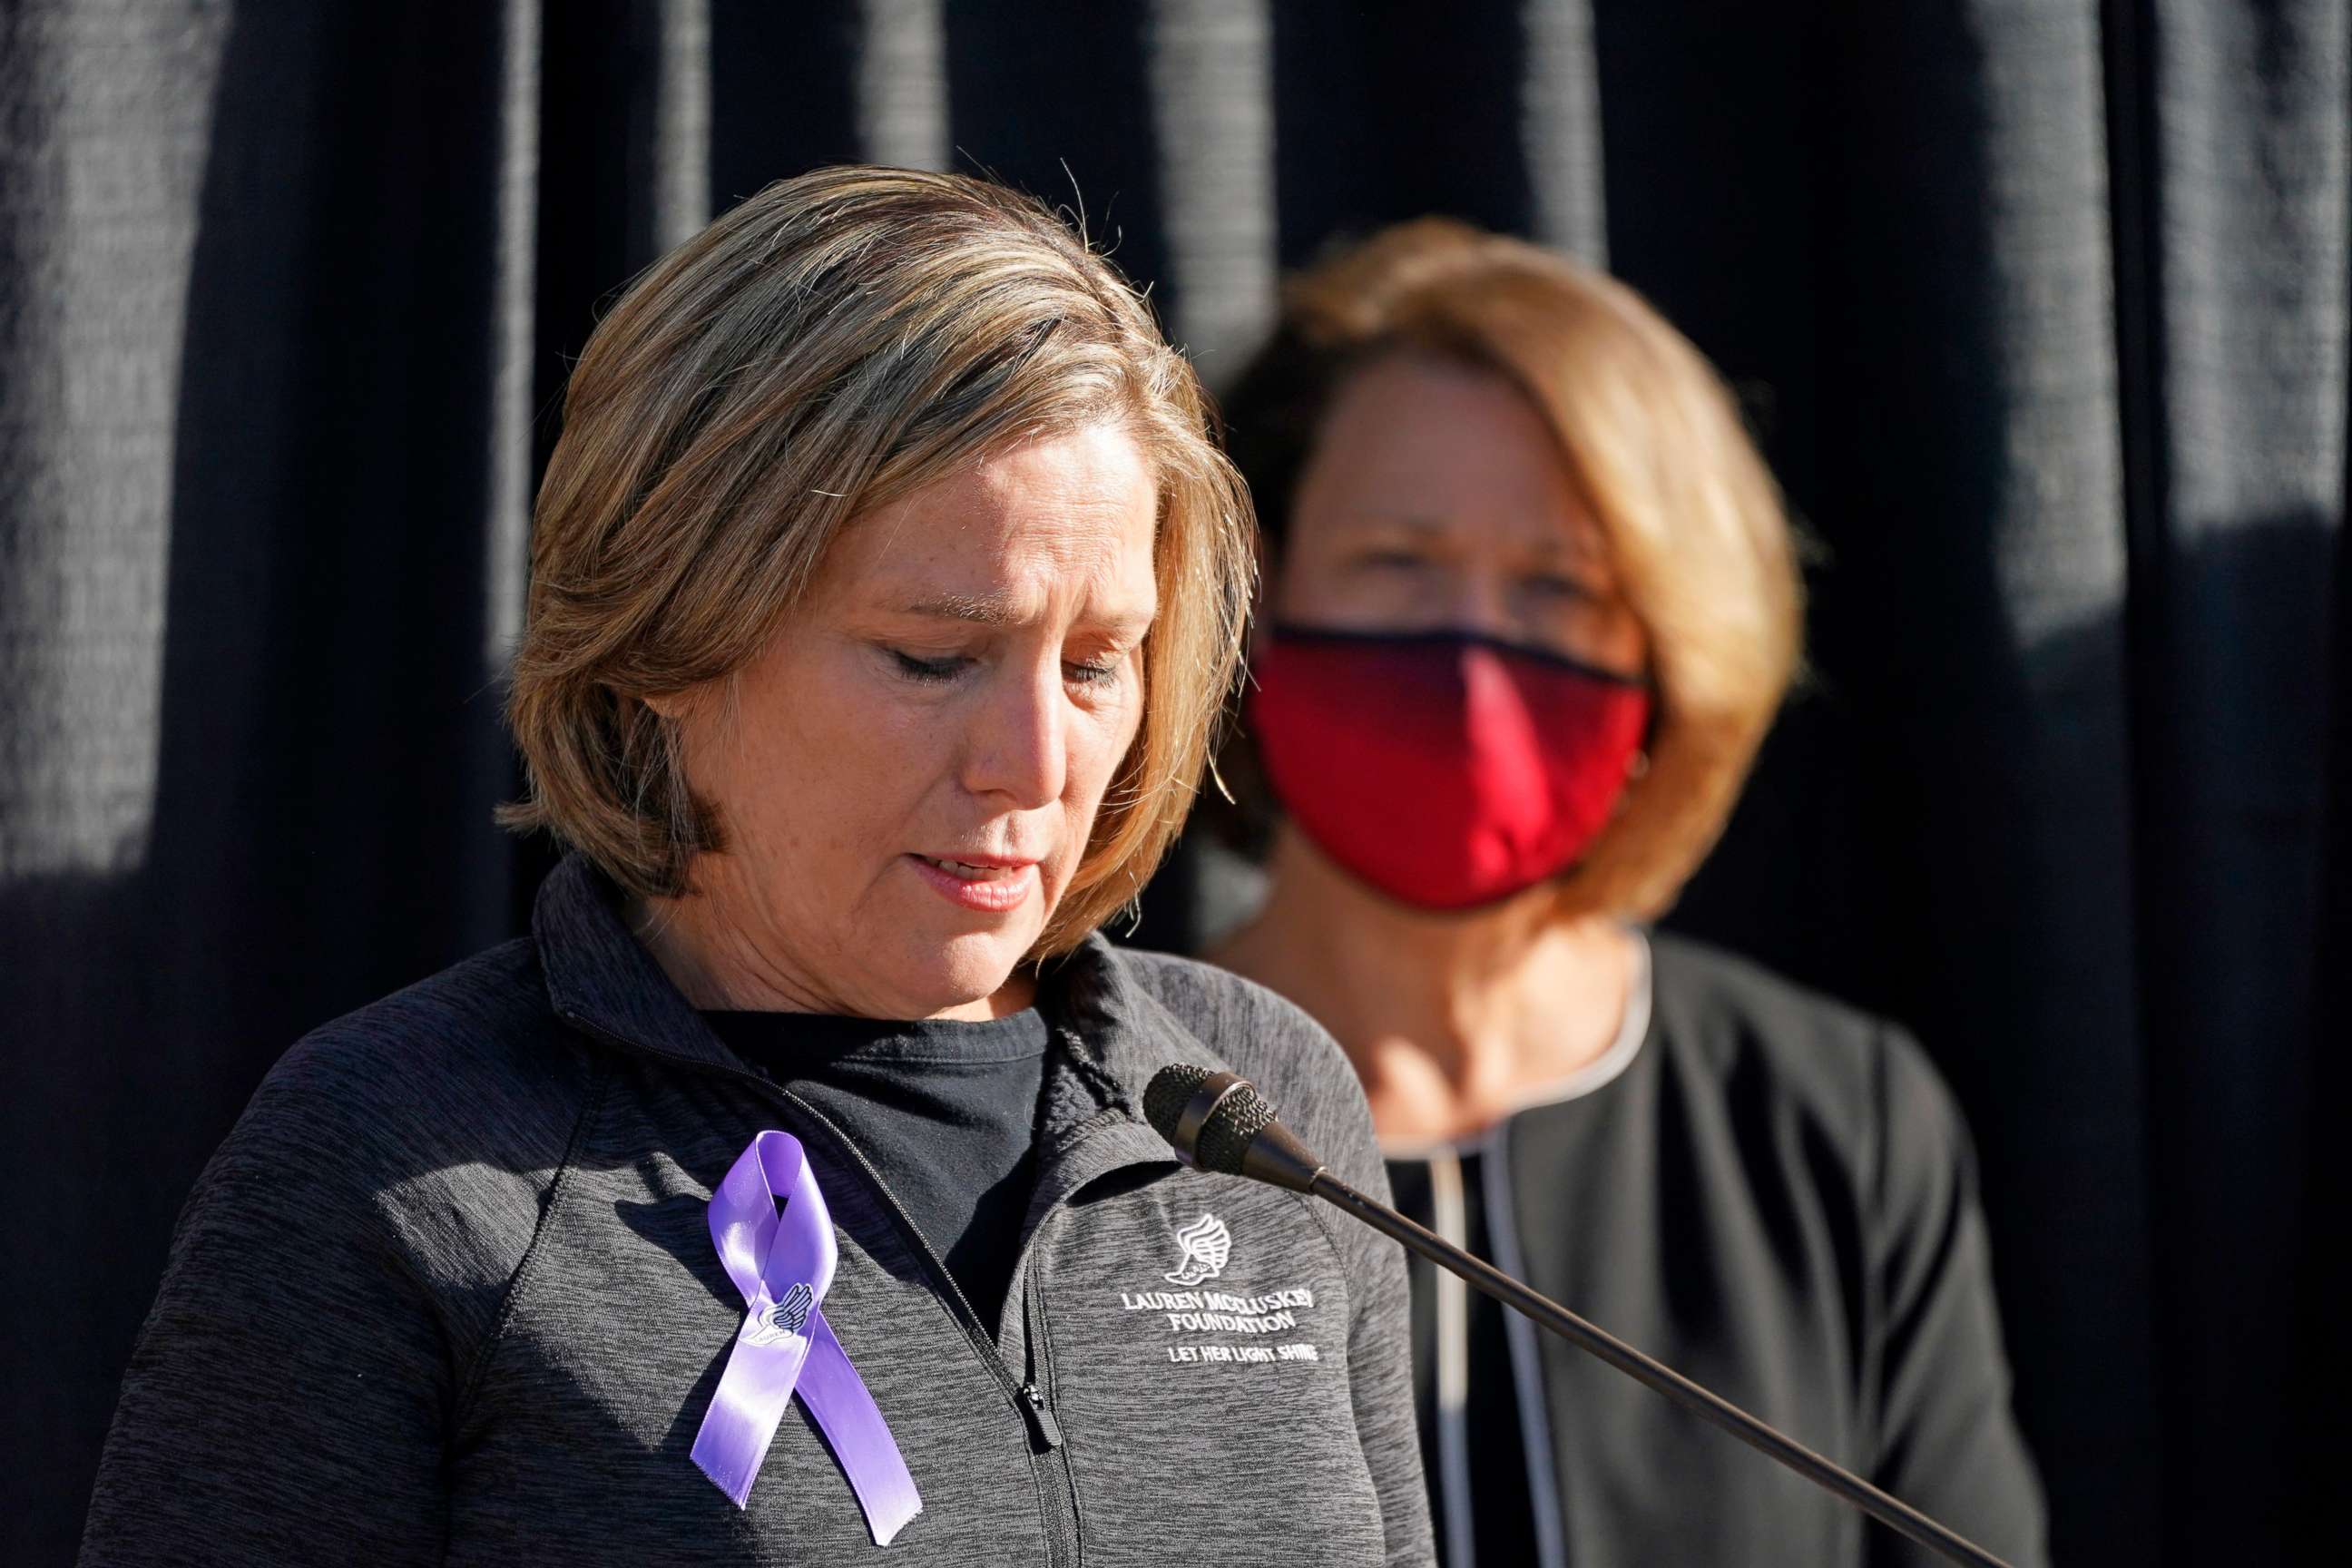 PHOTO: Jill McCluskey, the mother of slain University of Utah student-athlete Lauren McCluskey, speaks during a press conference announcing they have reached a settlement in their lawsuit against the university Thursday, Oct. 22, 2020, in Salt Lake City.